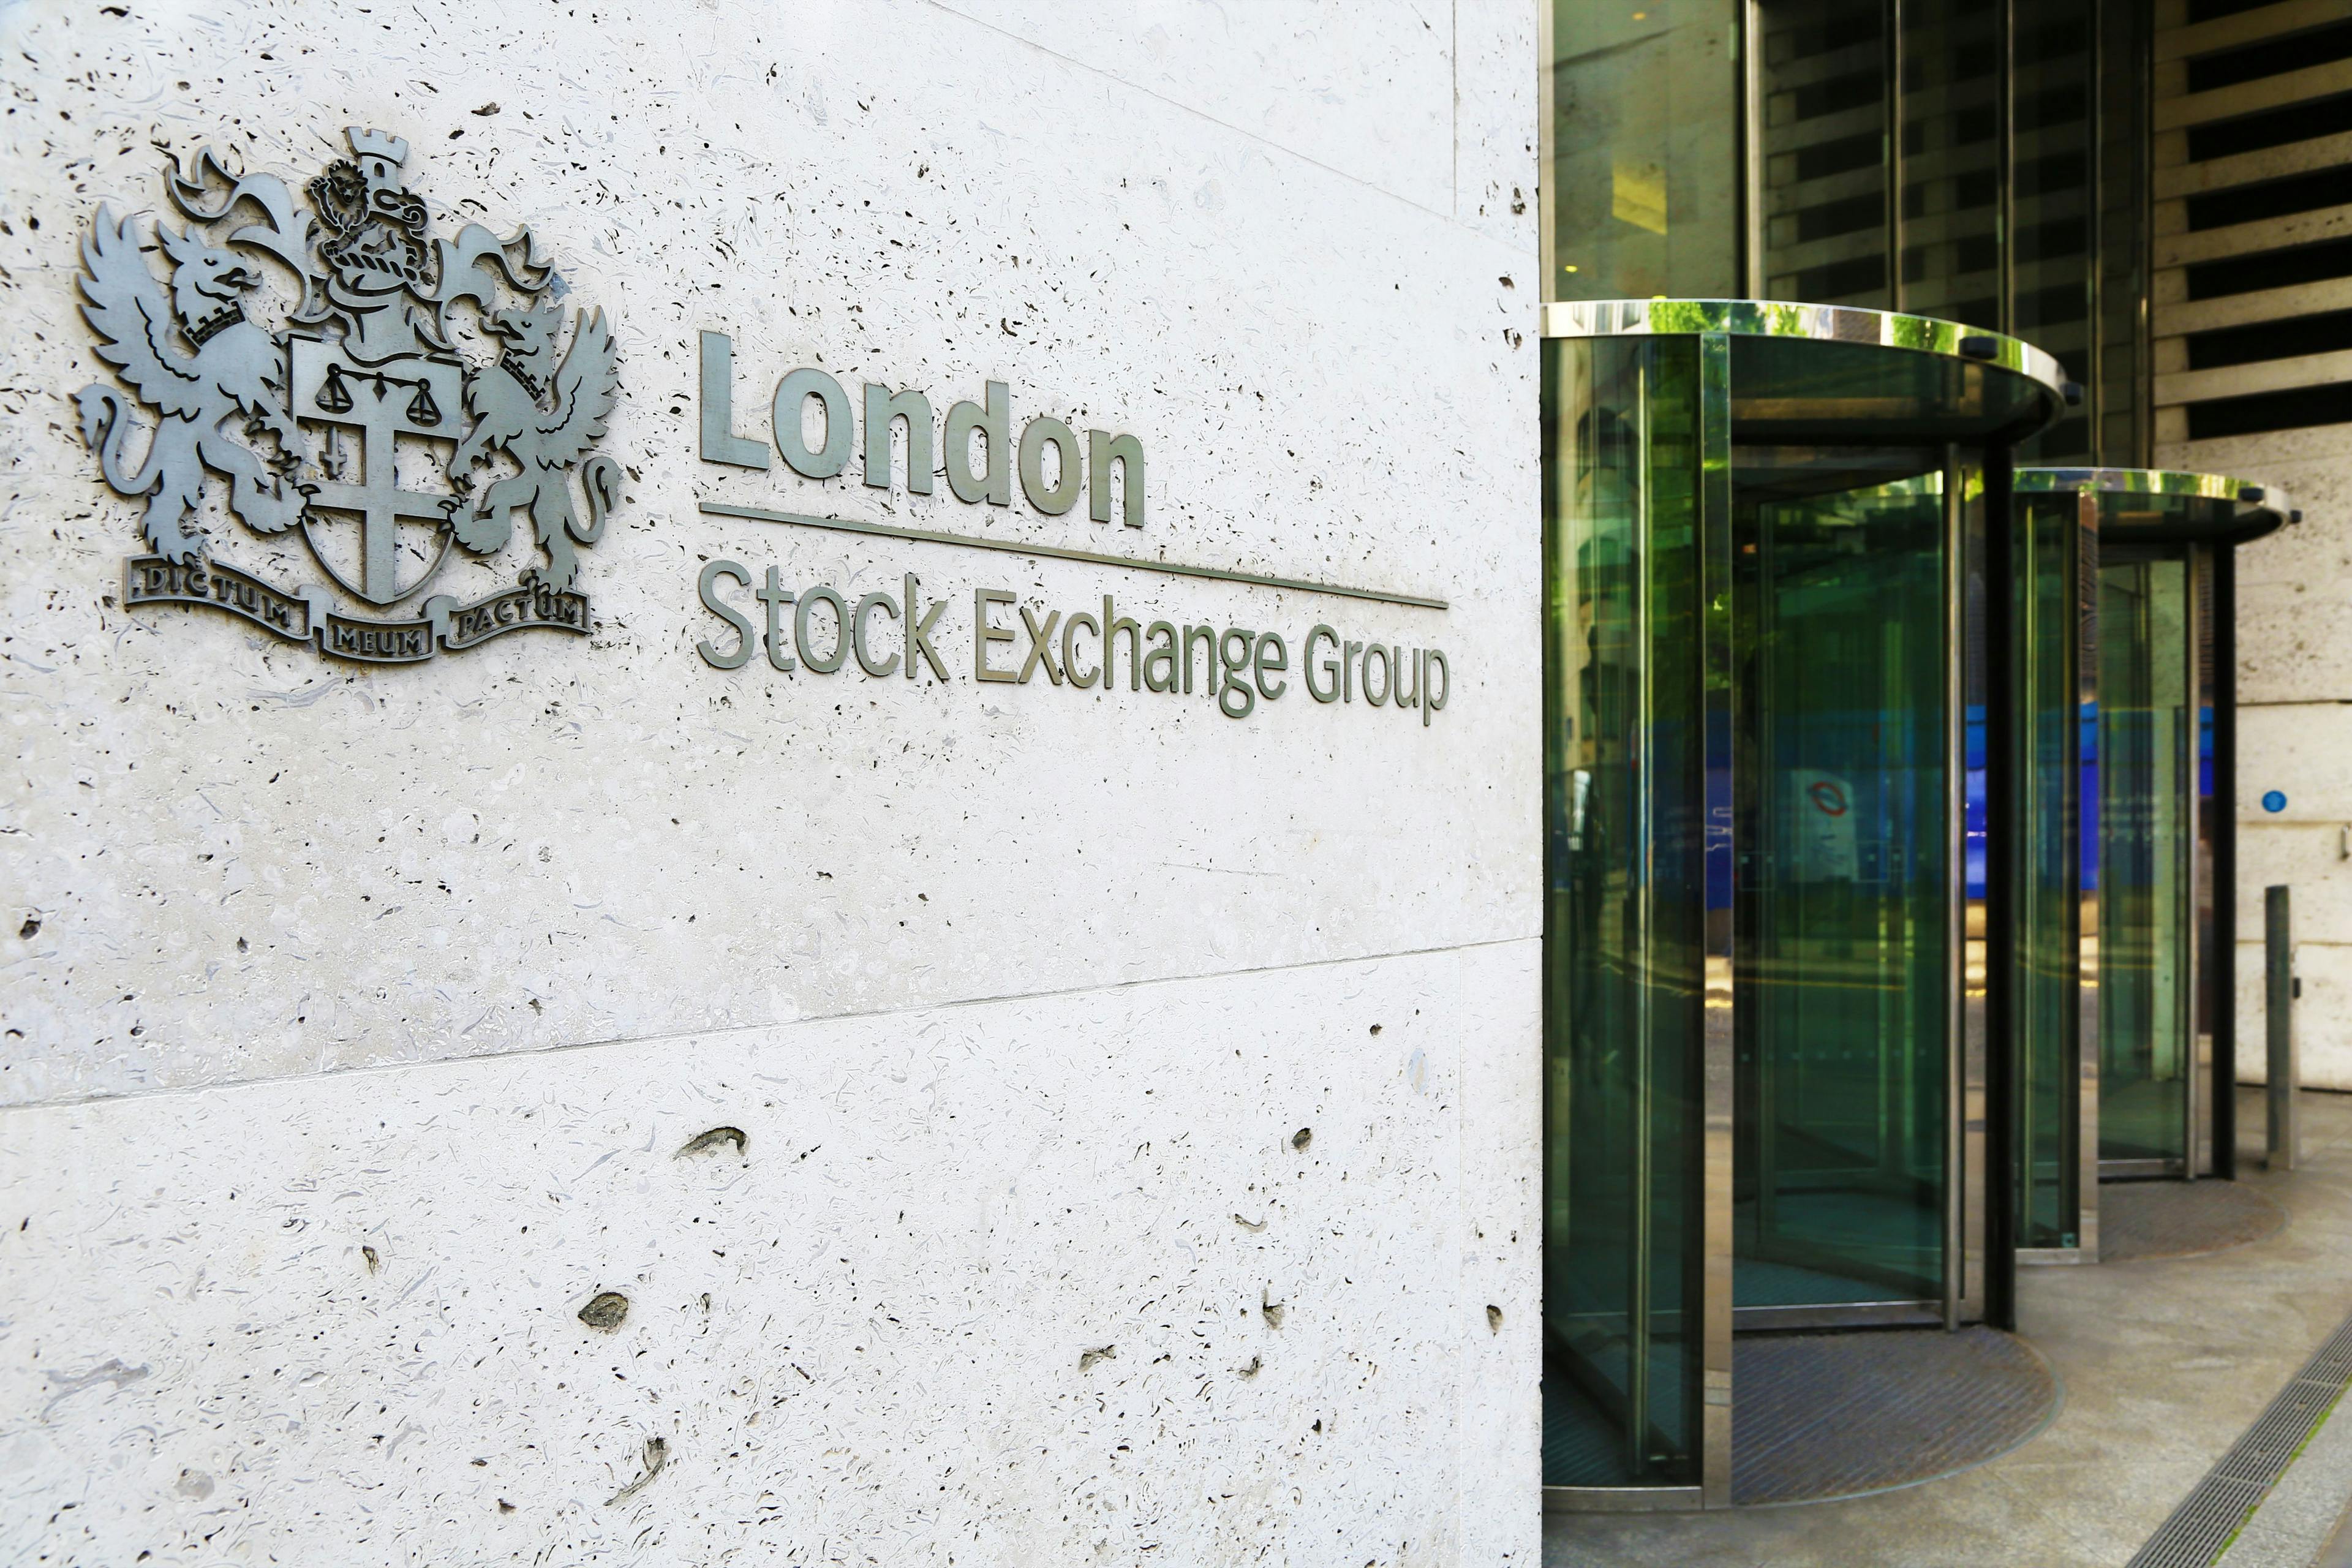 Entrance to the London Stock Exchange Group.